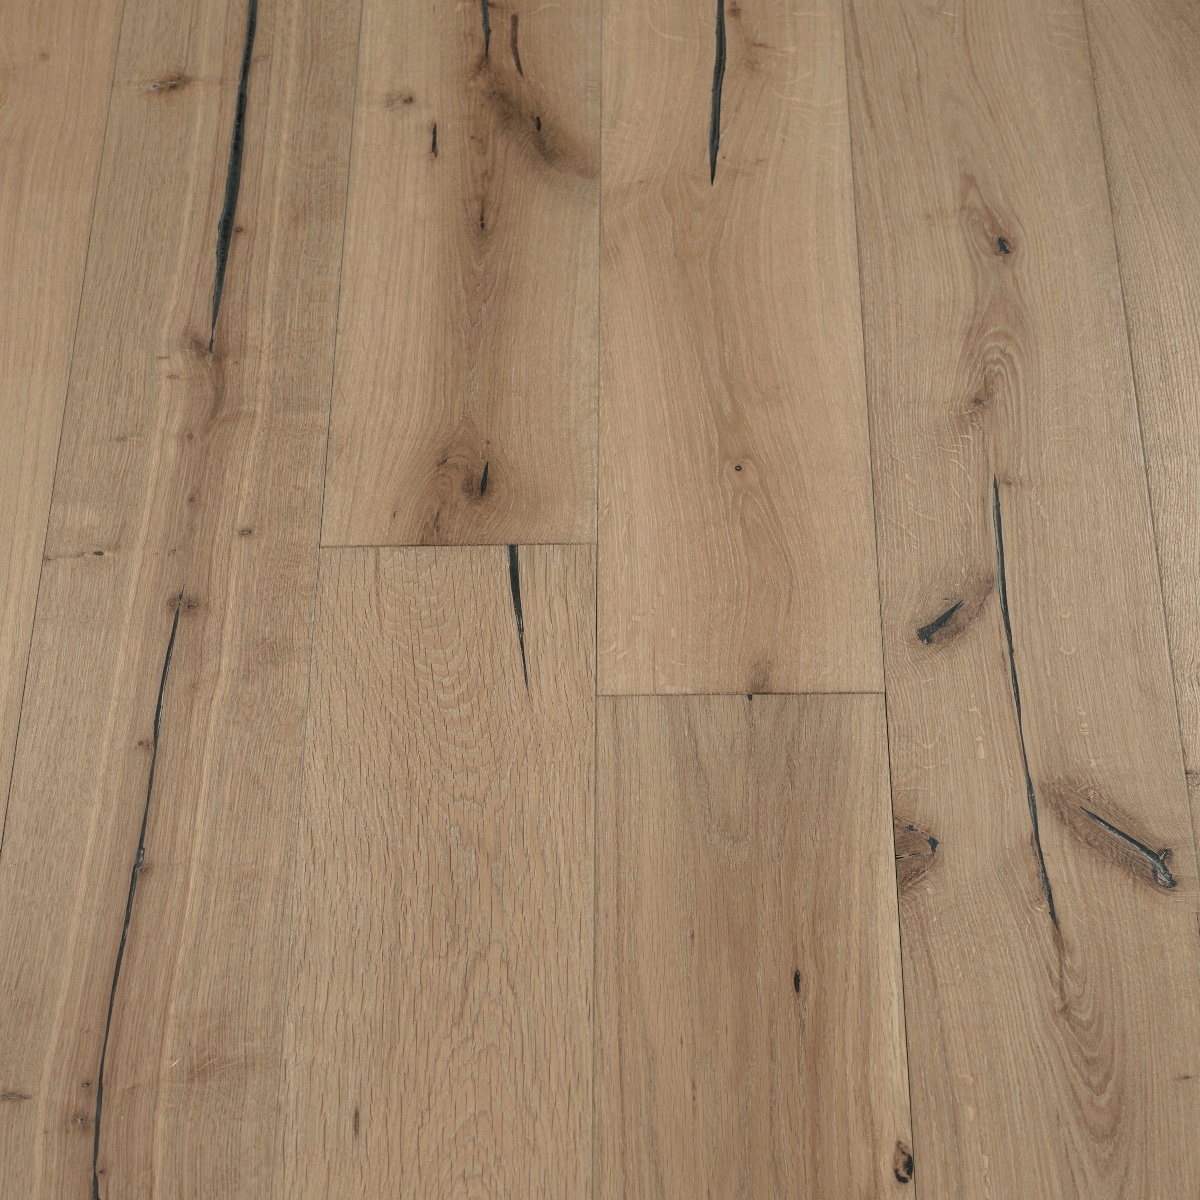 Ash Distressed Wood Flooring: An image showing distressed ash wood flooring with light grayish-brown hues and subtle wood grain textures, ideal for modern and minimalist interiors.